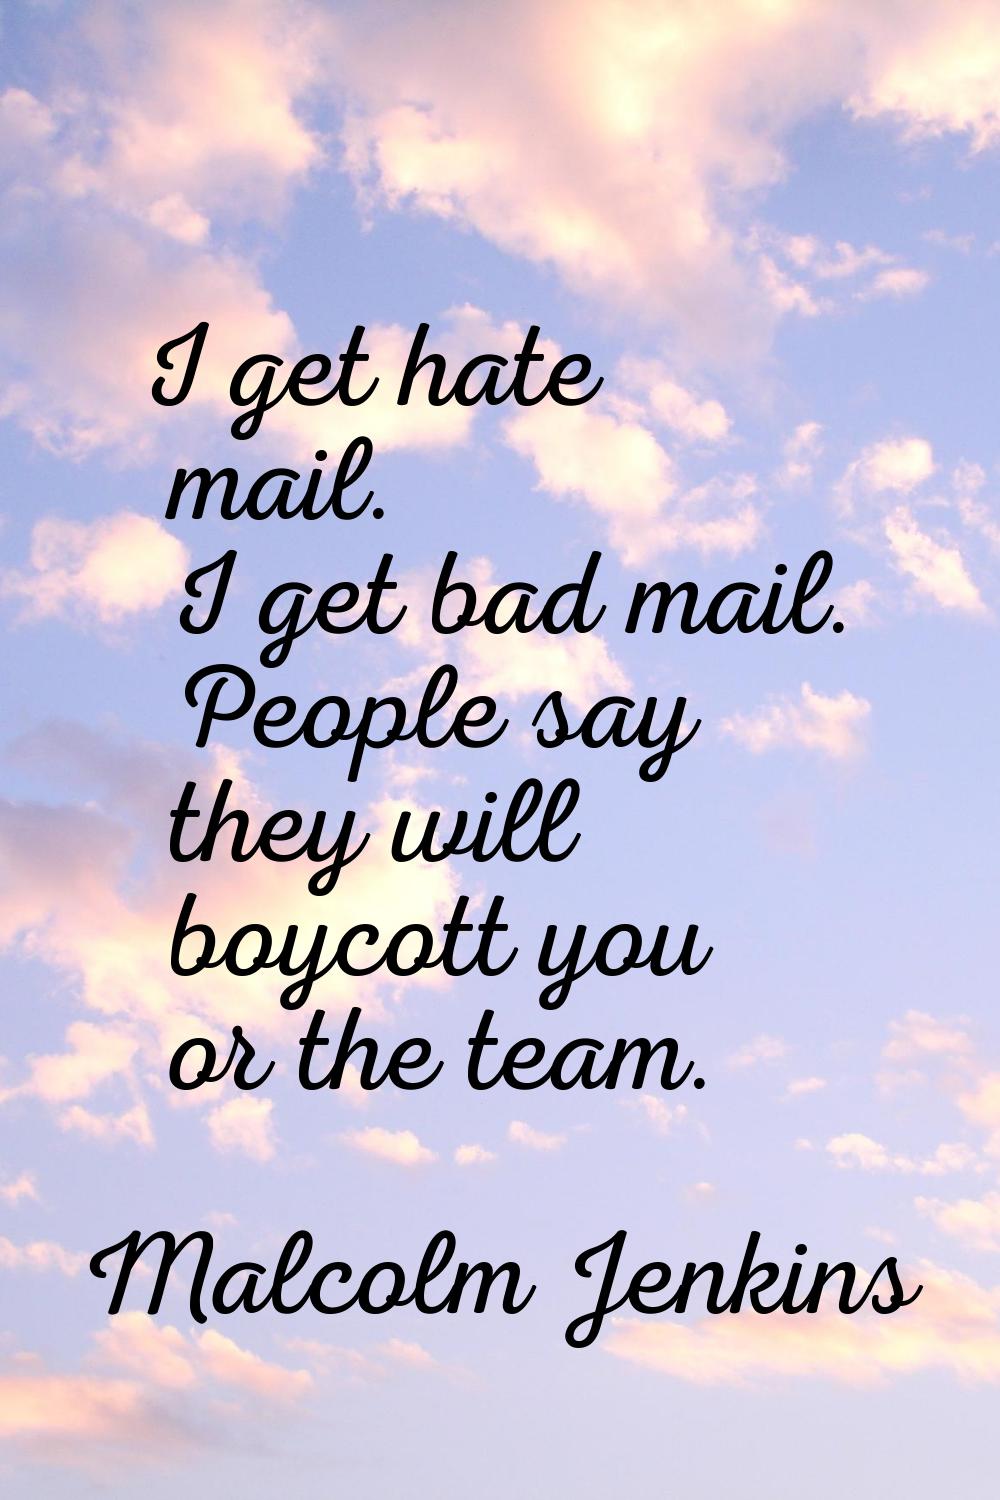 I get hate mail. I get bad mail. People say they will boycott you or the team.